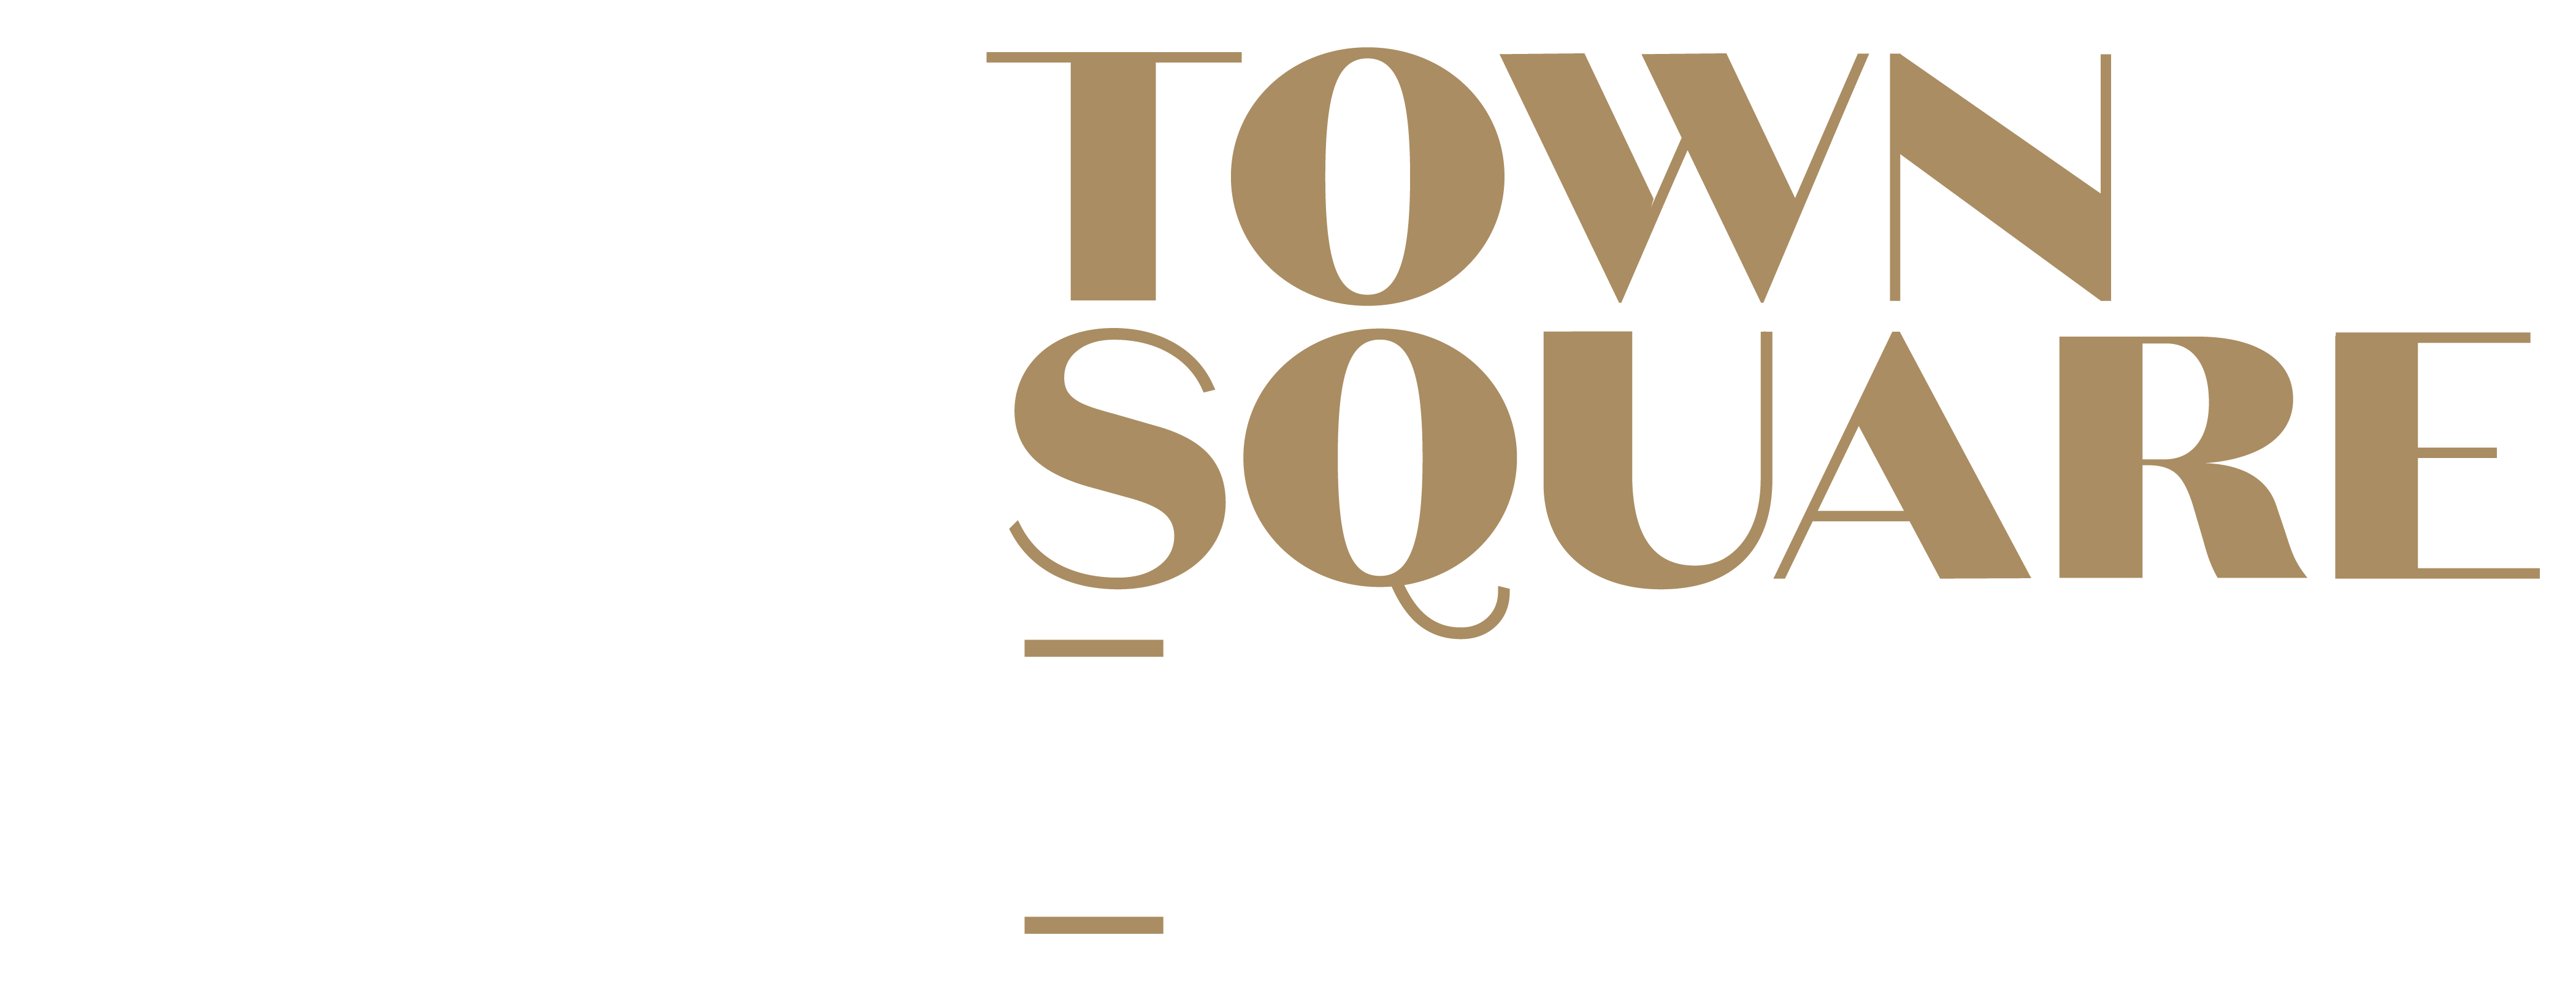 Town Square Group Logo